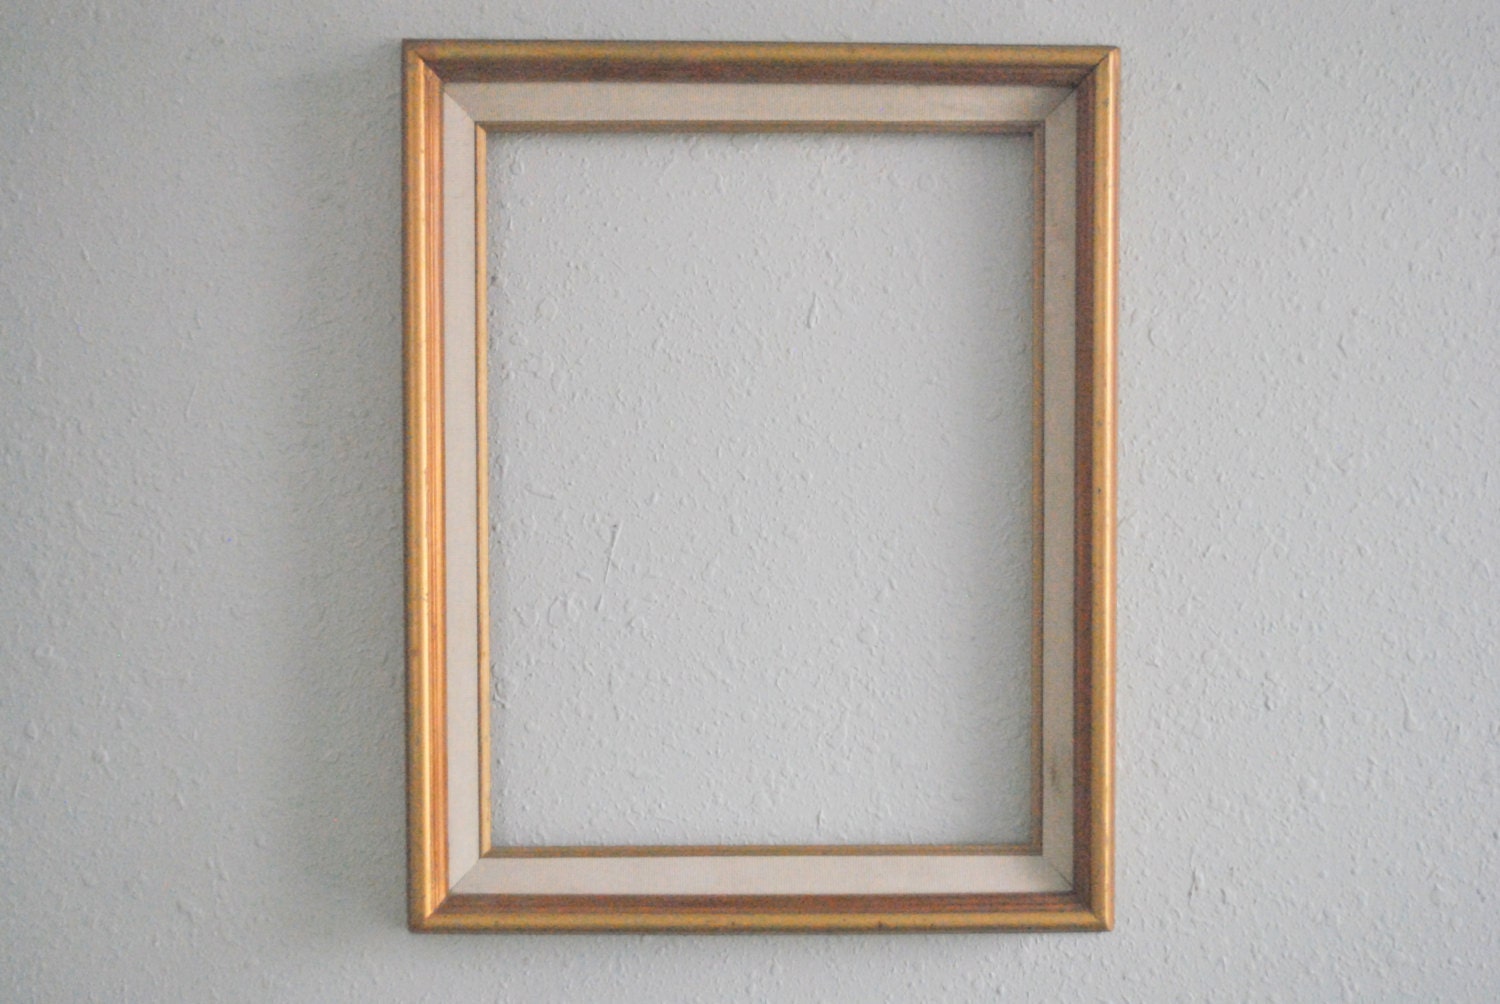 10 x 13 Ridged Gold Vintage Wood Frame with White Cloth Inner